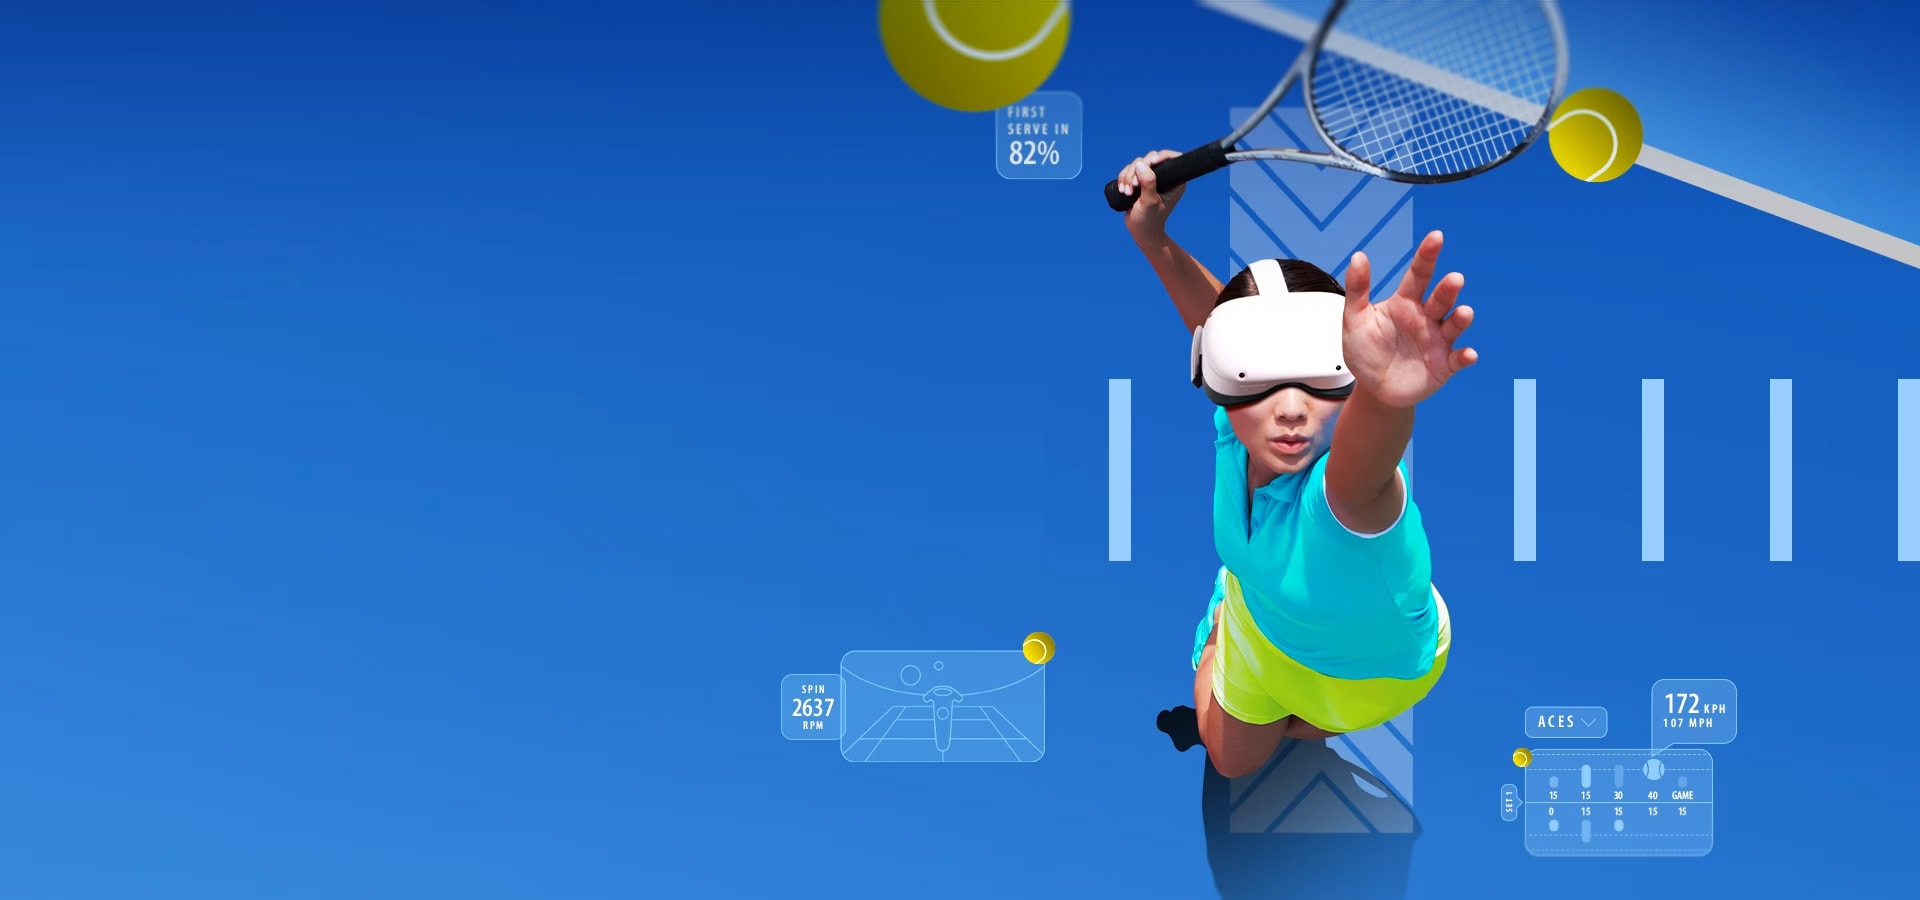 Get closer to Australian Open 2023 with Infosys